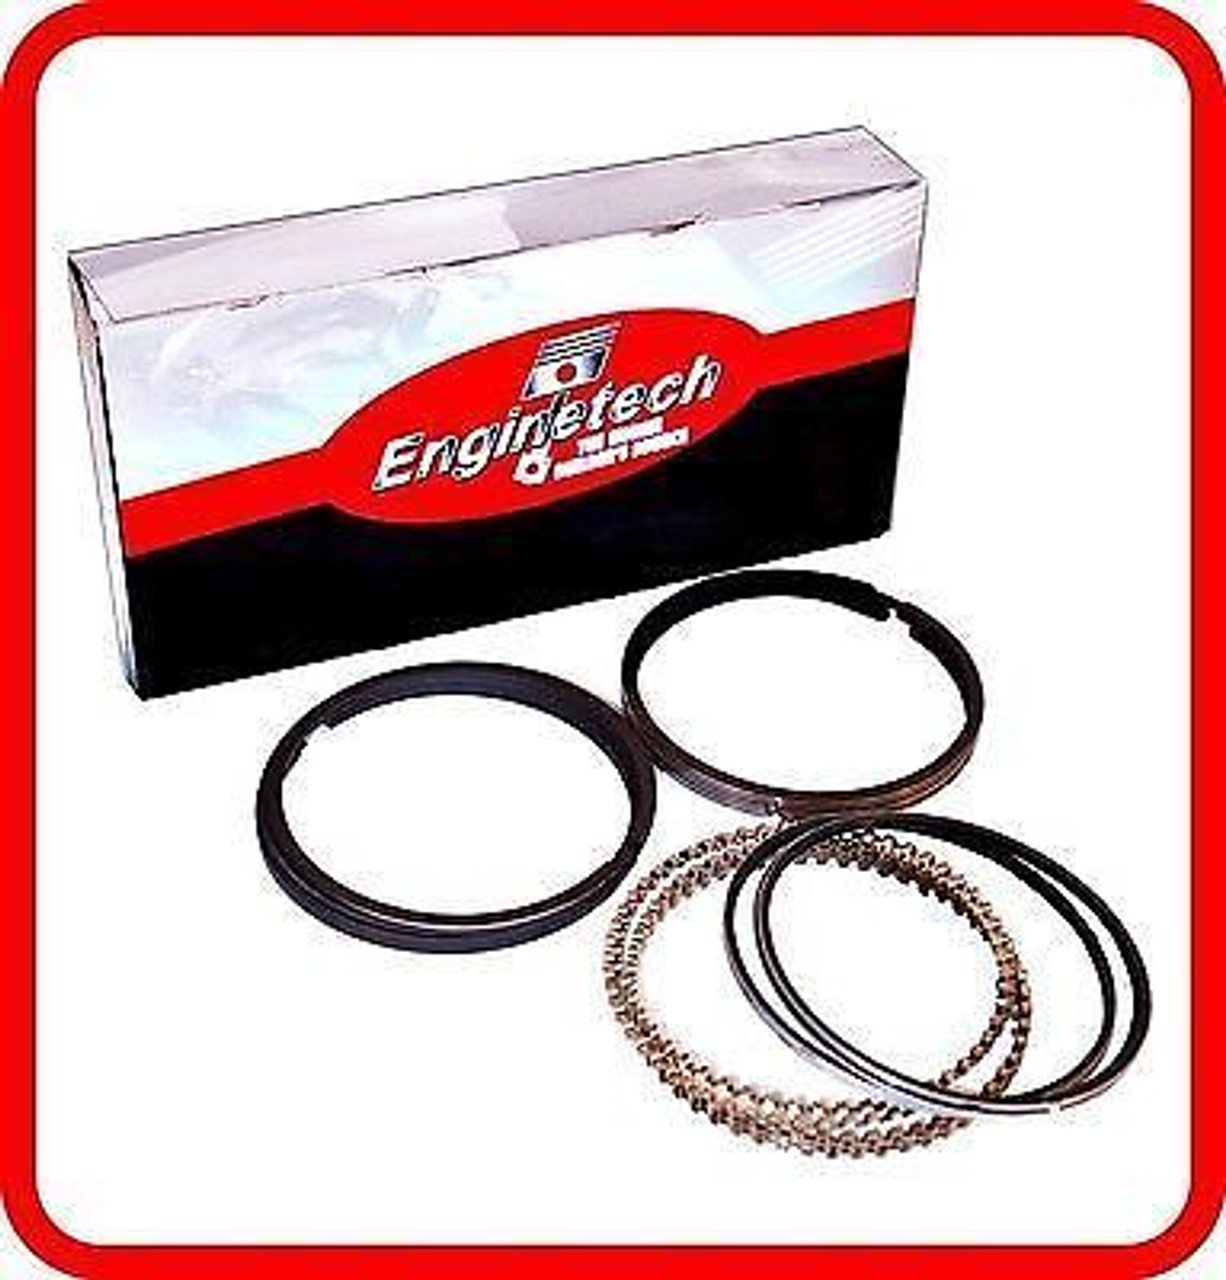 1993 Cadillac Commercial Chassis 4.9L Engine Piston Ring Set M92138 -62